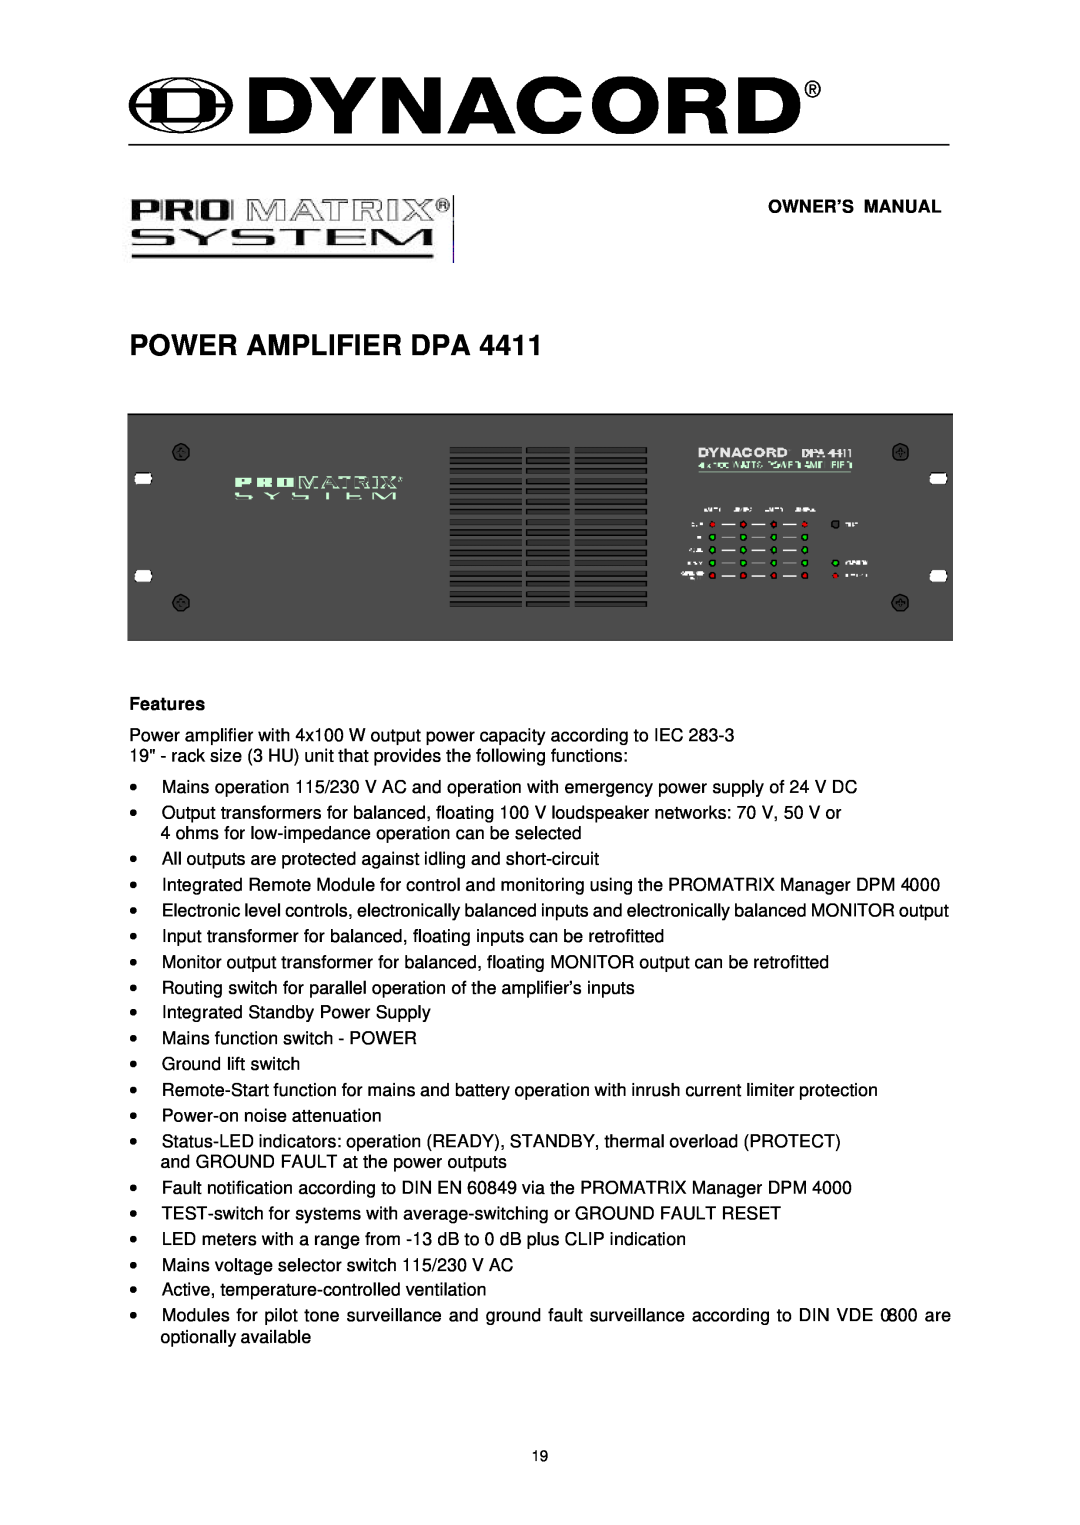 Dynacord DPA 4411 owner manual Power Amplifier Dpa, Features 